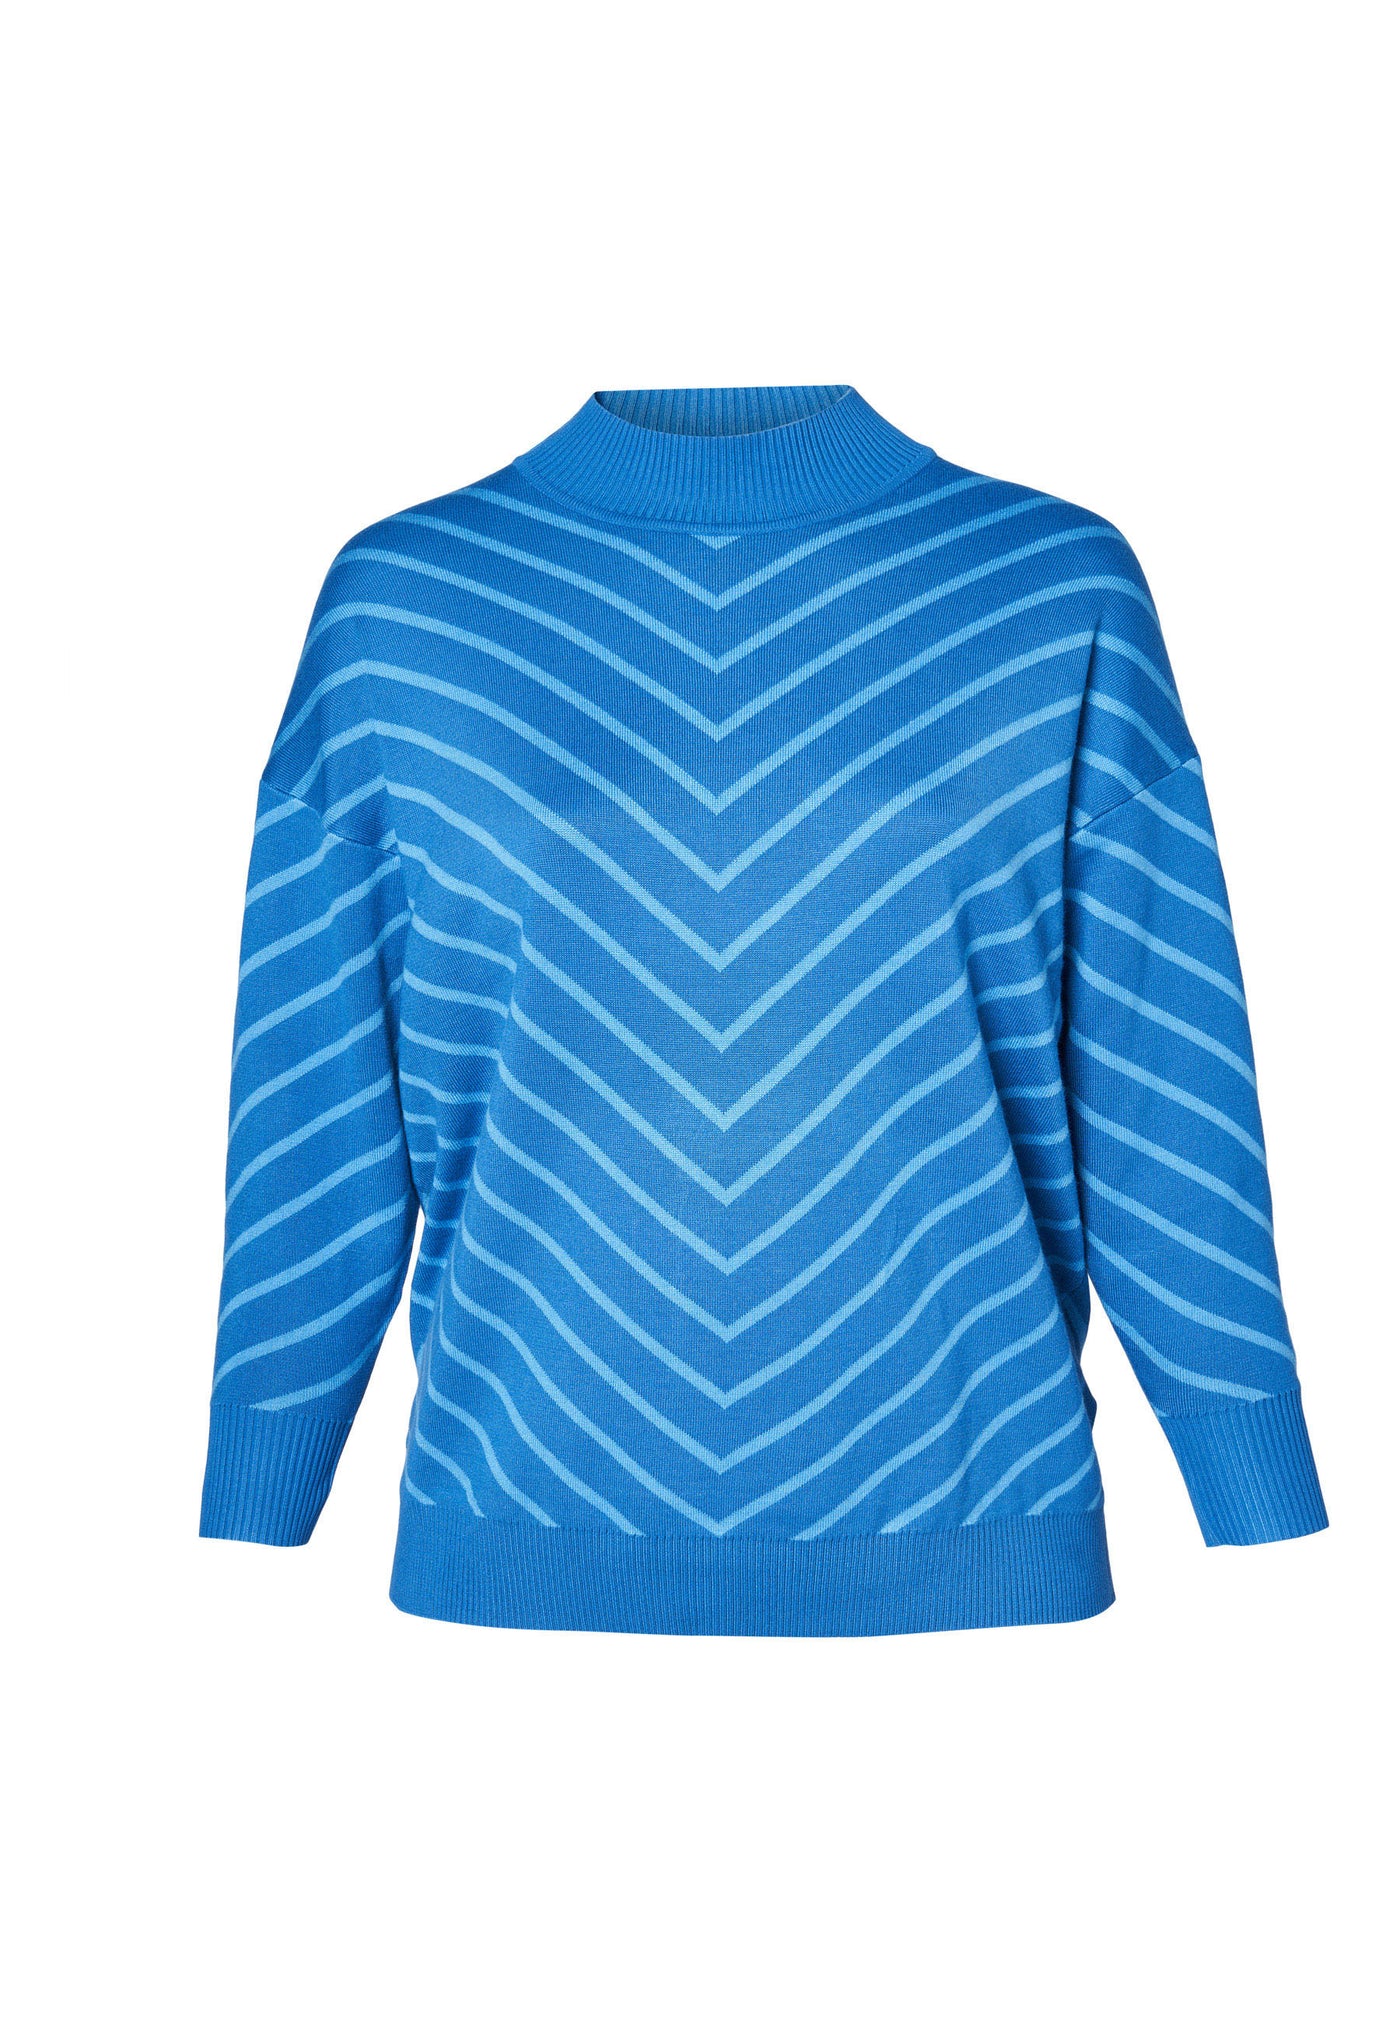 Adia ADEvelyn Knit Pullover 5400 Nautical Blue